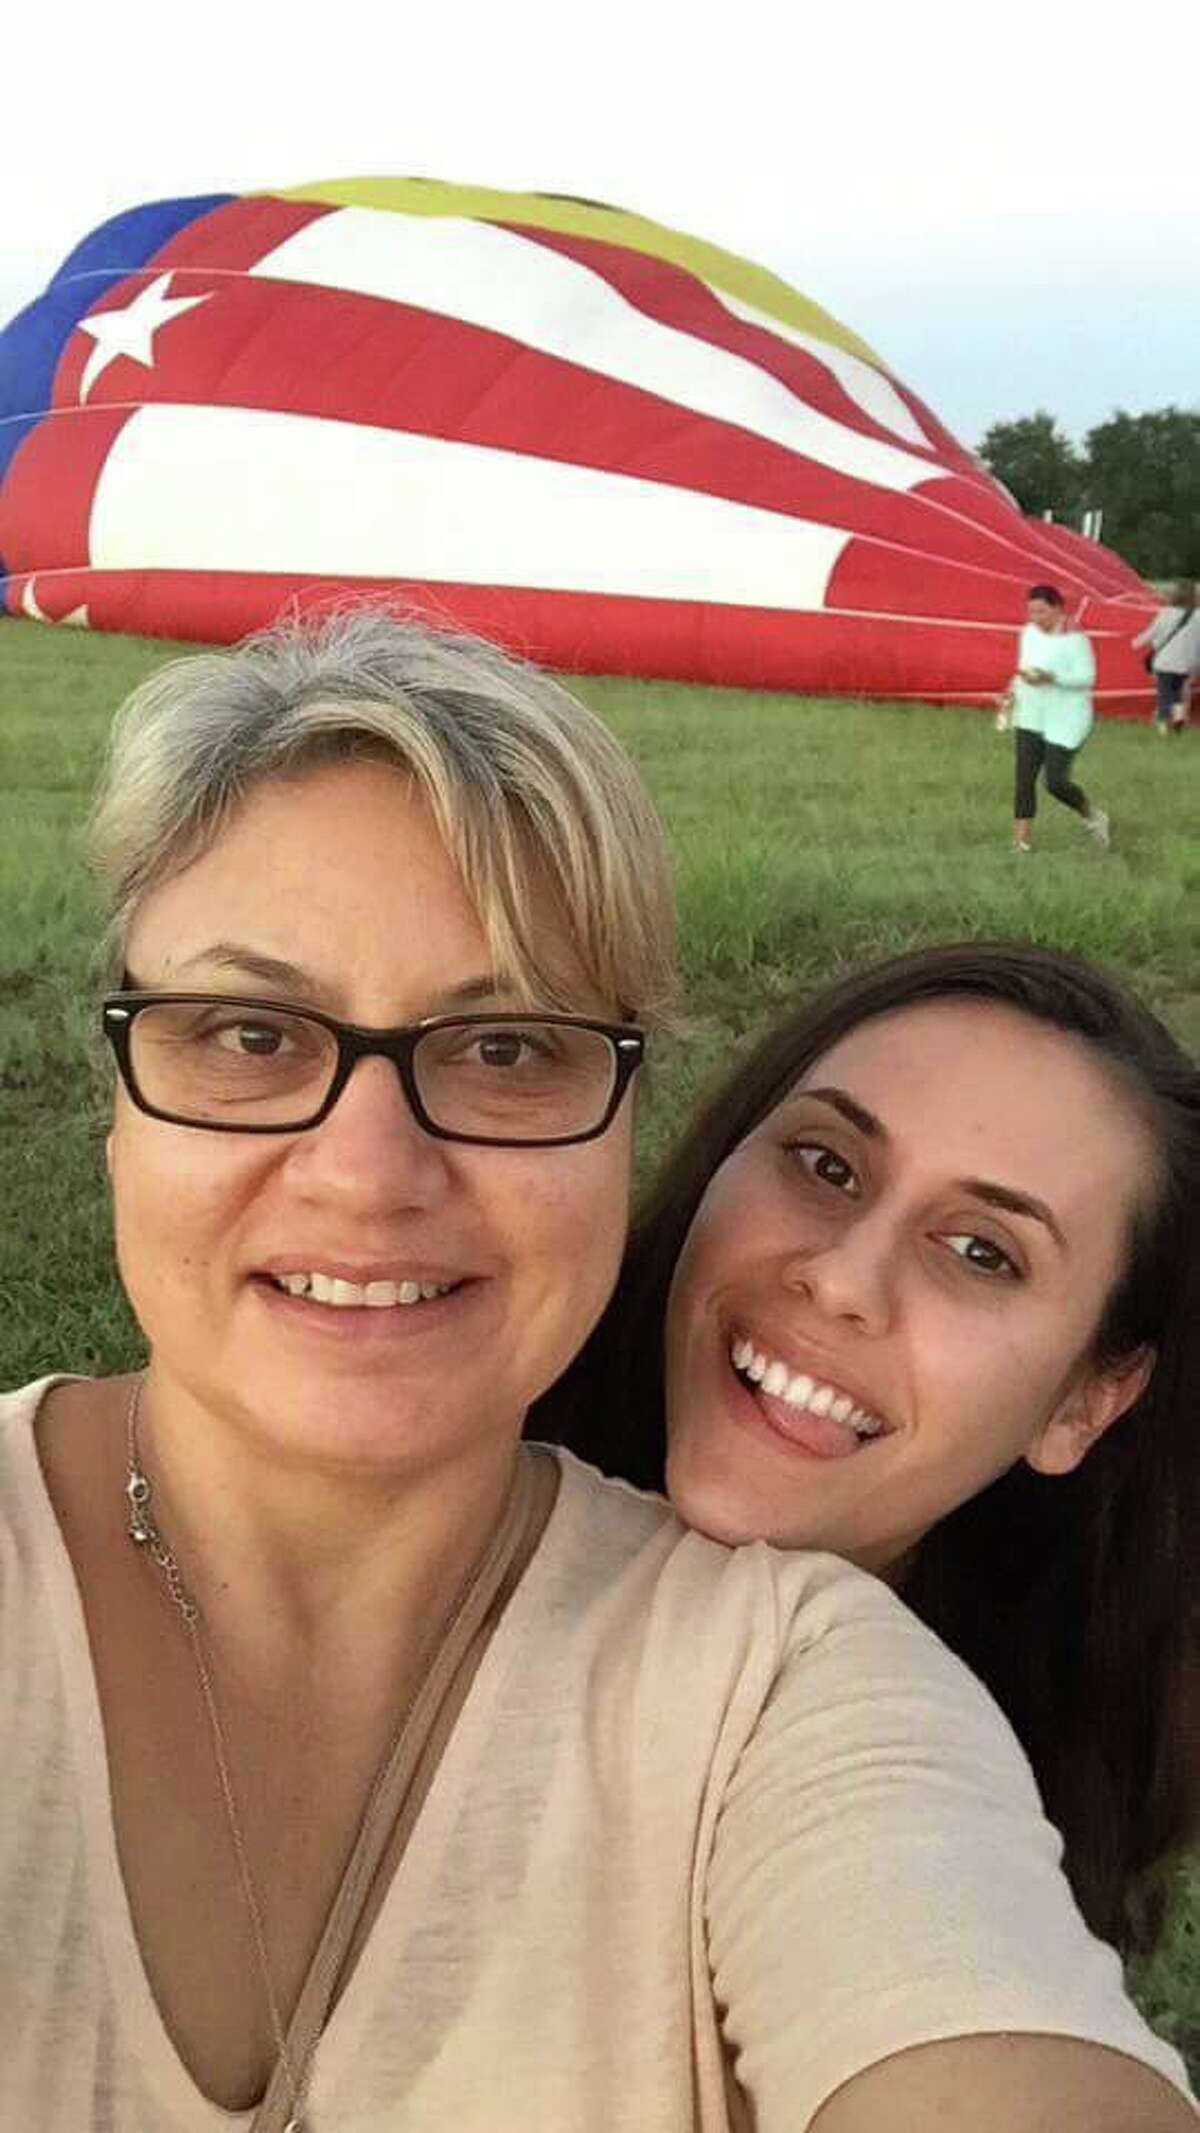 Lorilee, left, and Paige Brabson, right, were killed July 30 in a hot air balloon crash in Lockhart. The father of Paige Brabson's daughter wrote on Facebook July 31 saying, "Yesterday, the beloved mother of my daughter, Paige Brabson and her mother, Lorilee Brabson, both passed away in a tragic hot air balloon accident. All I ask for are prayers and good vibes not just for myself but the Brabson family as well."